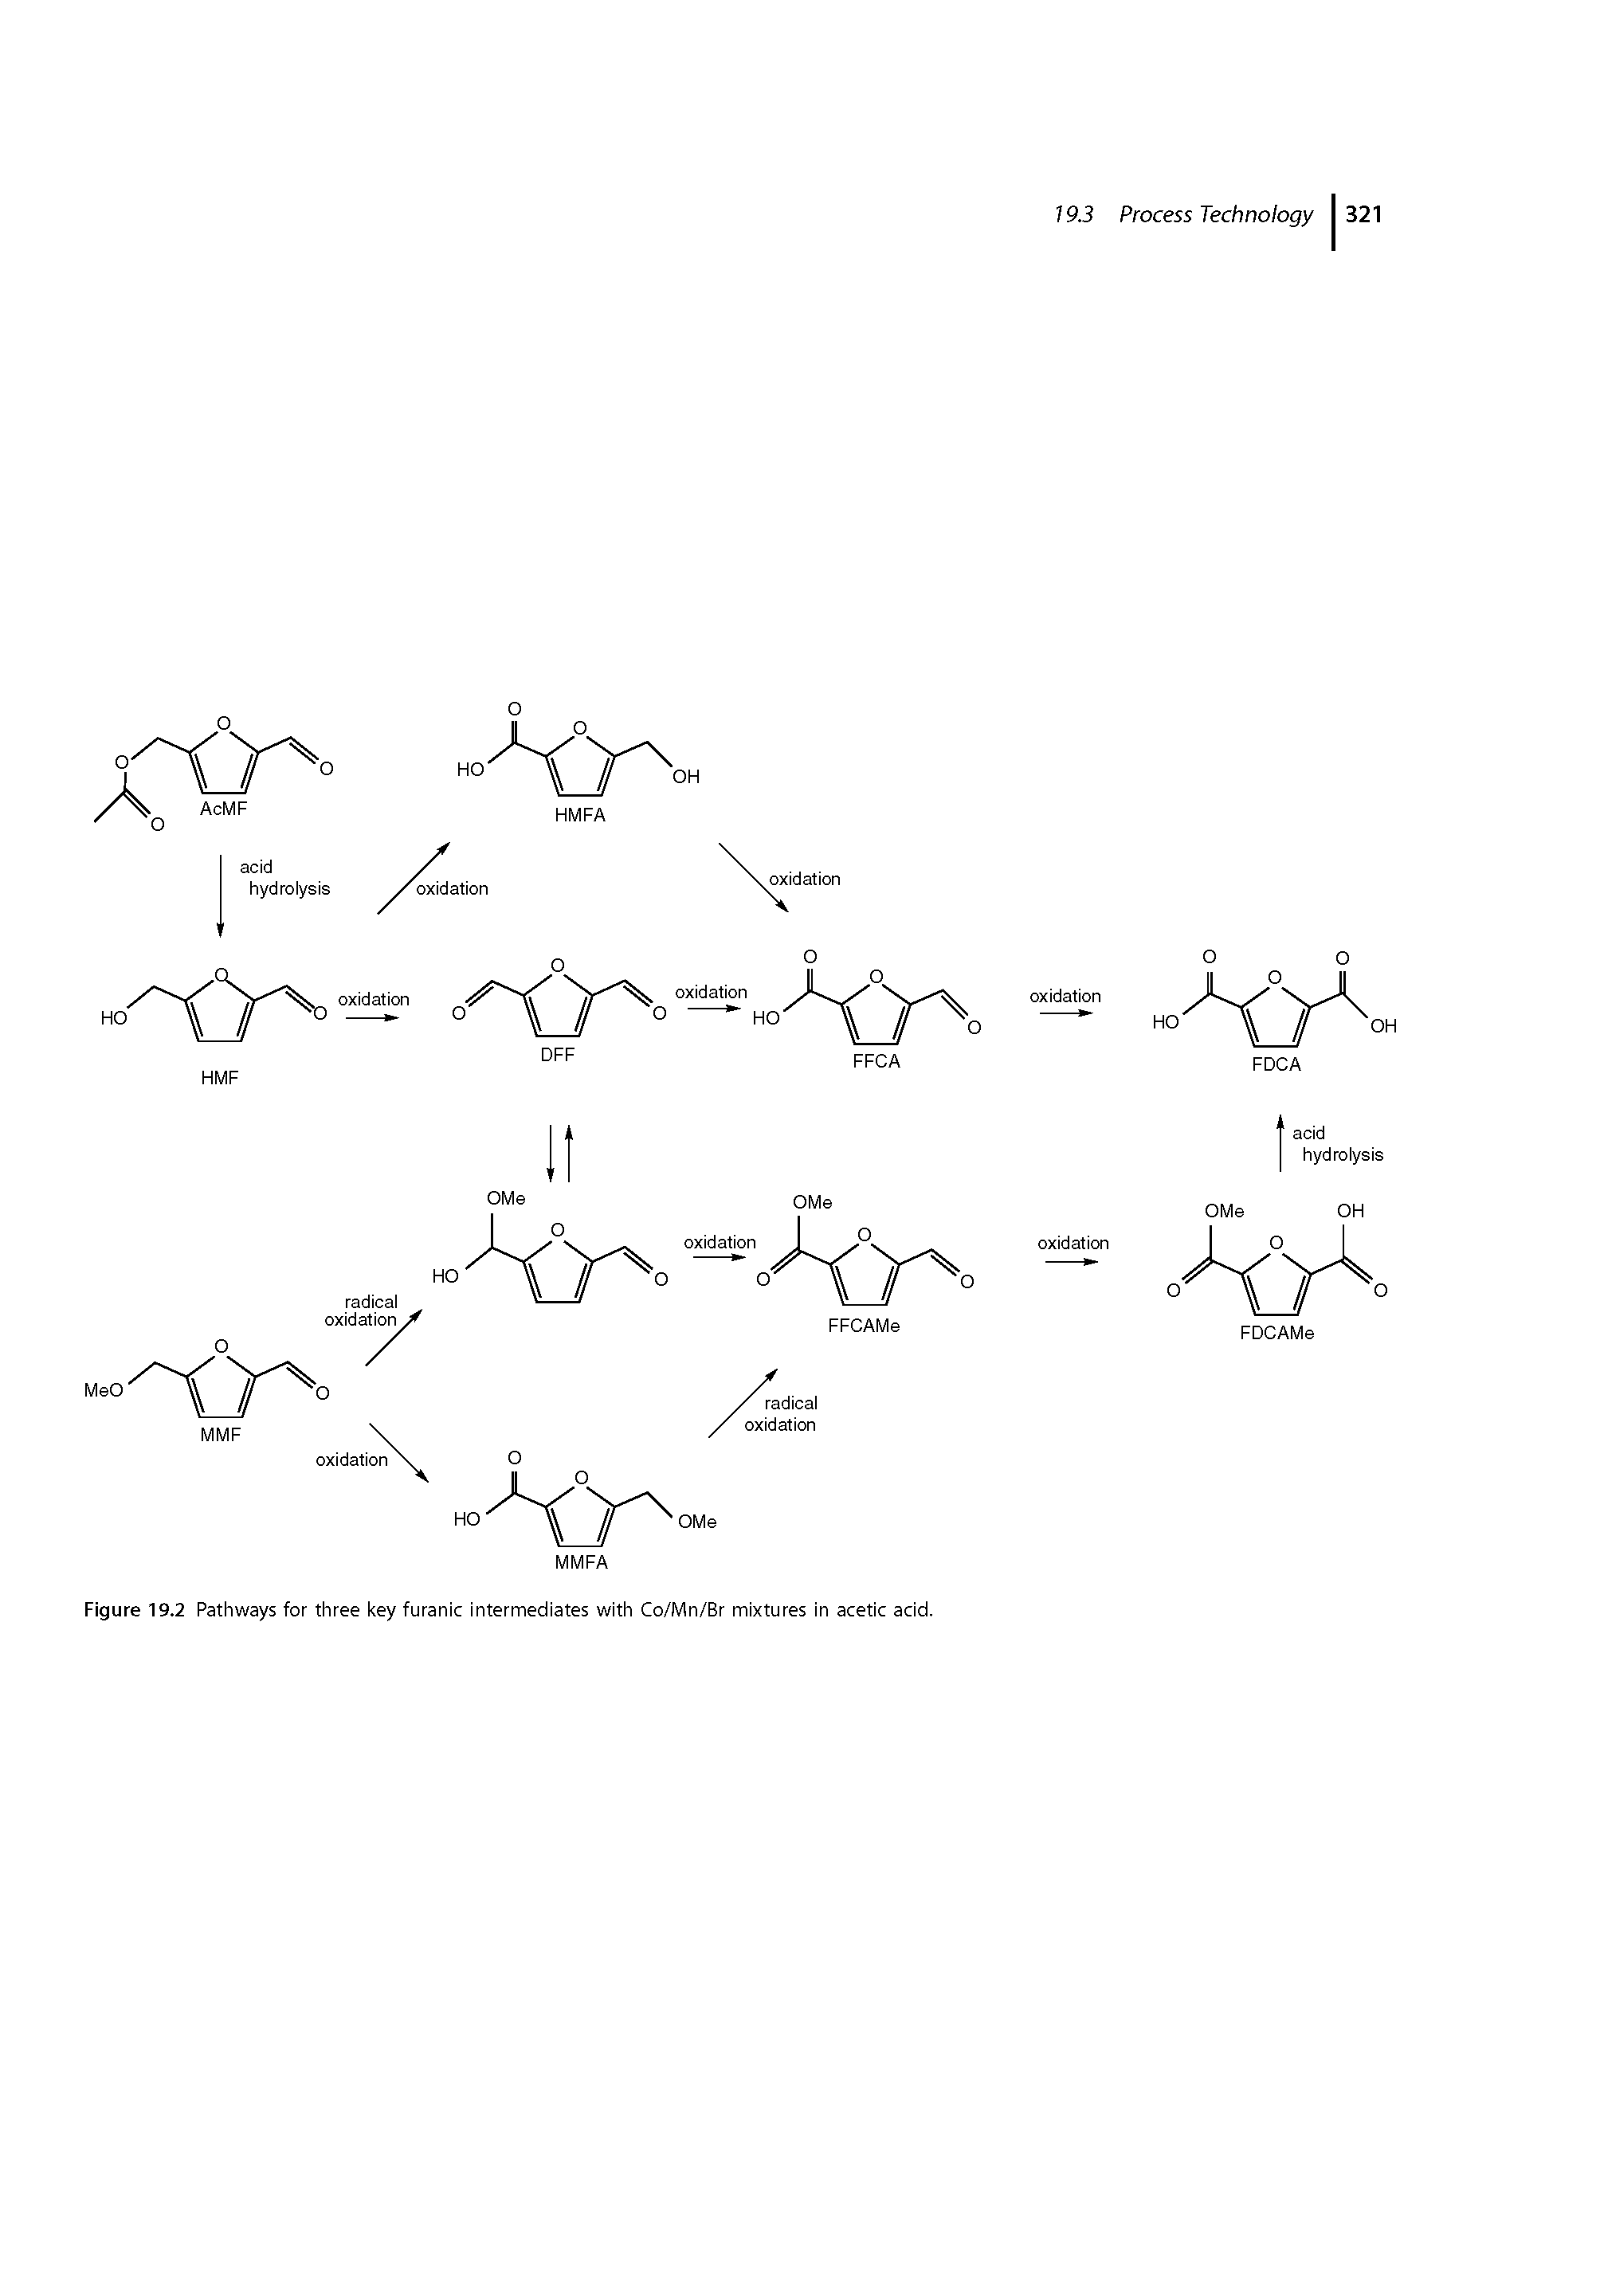 Figure 19.2 Pathways for three key furanic intermediates with Co/Mn/Br mixtures in acetic acid.